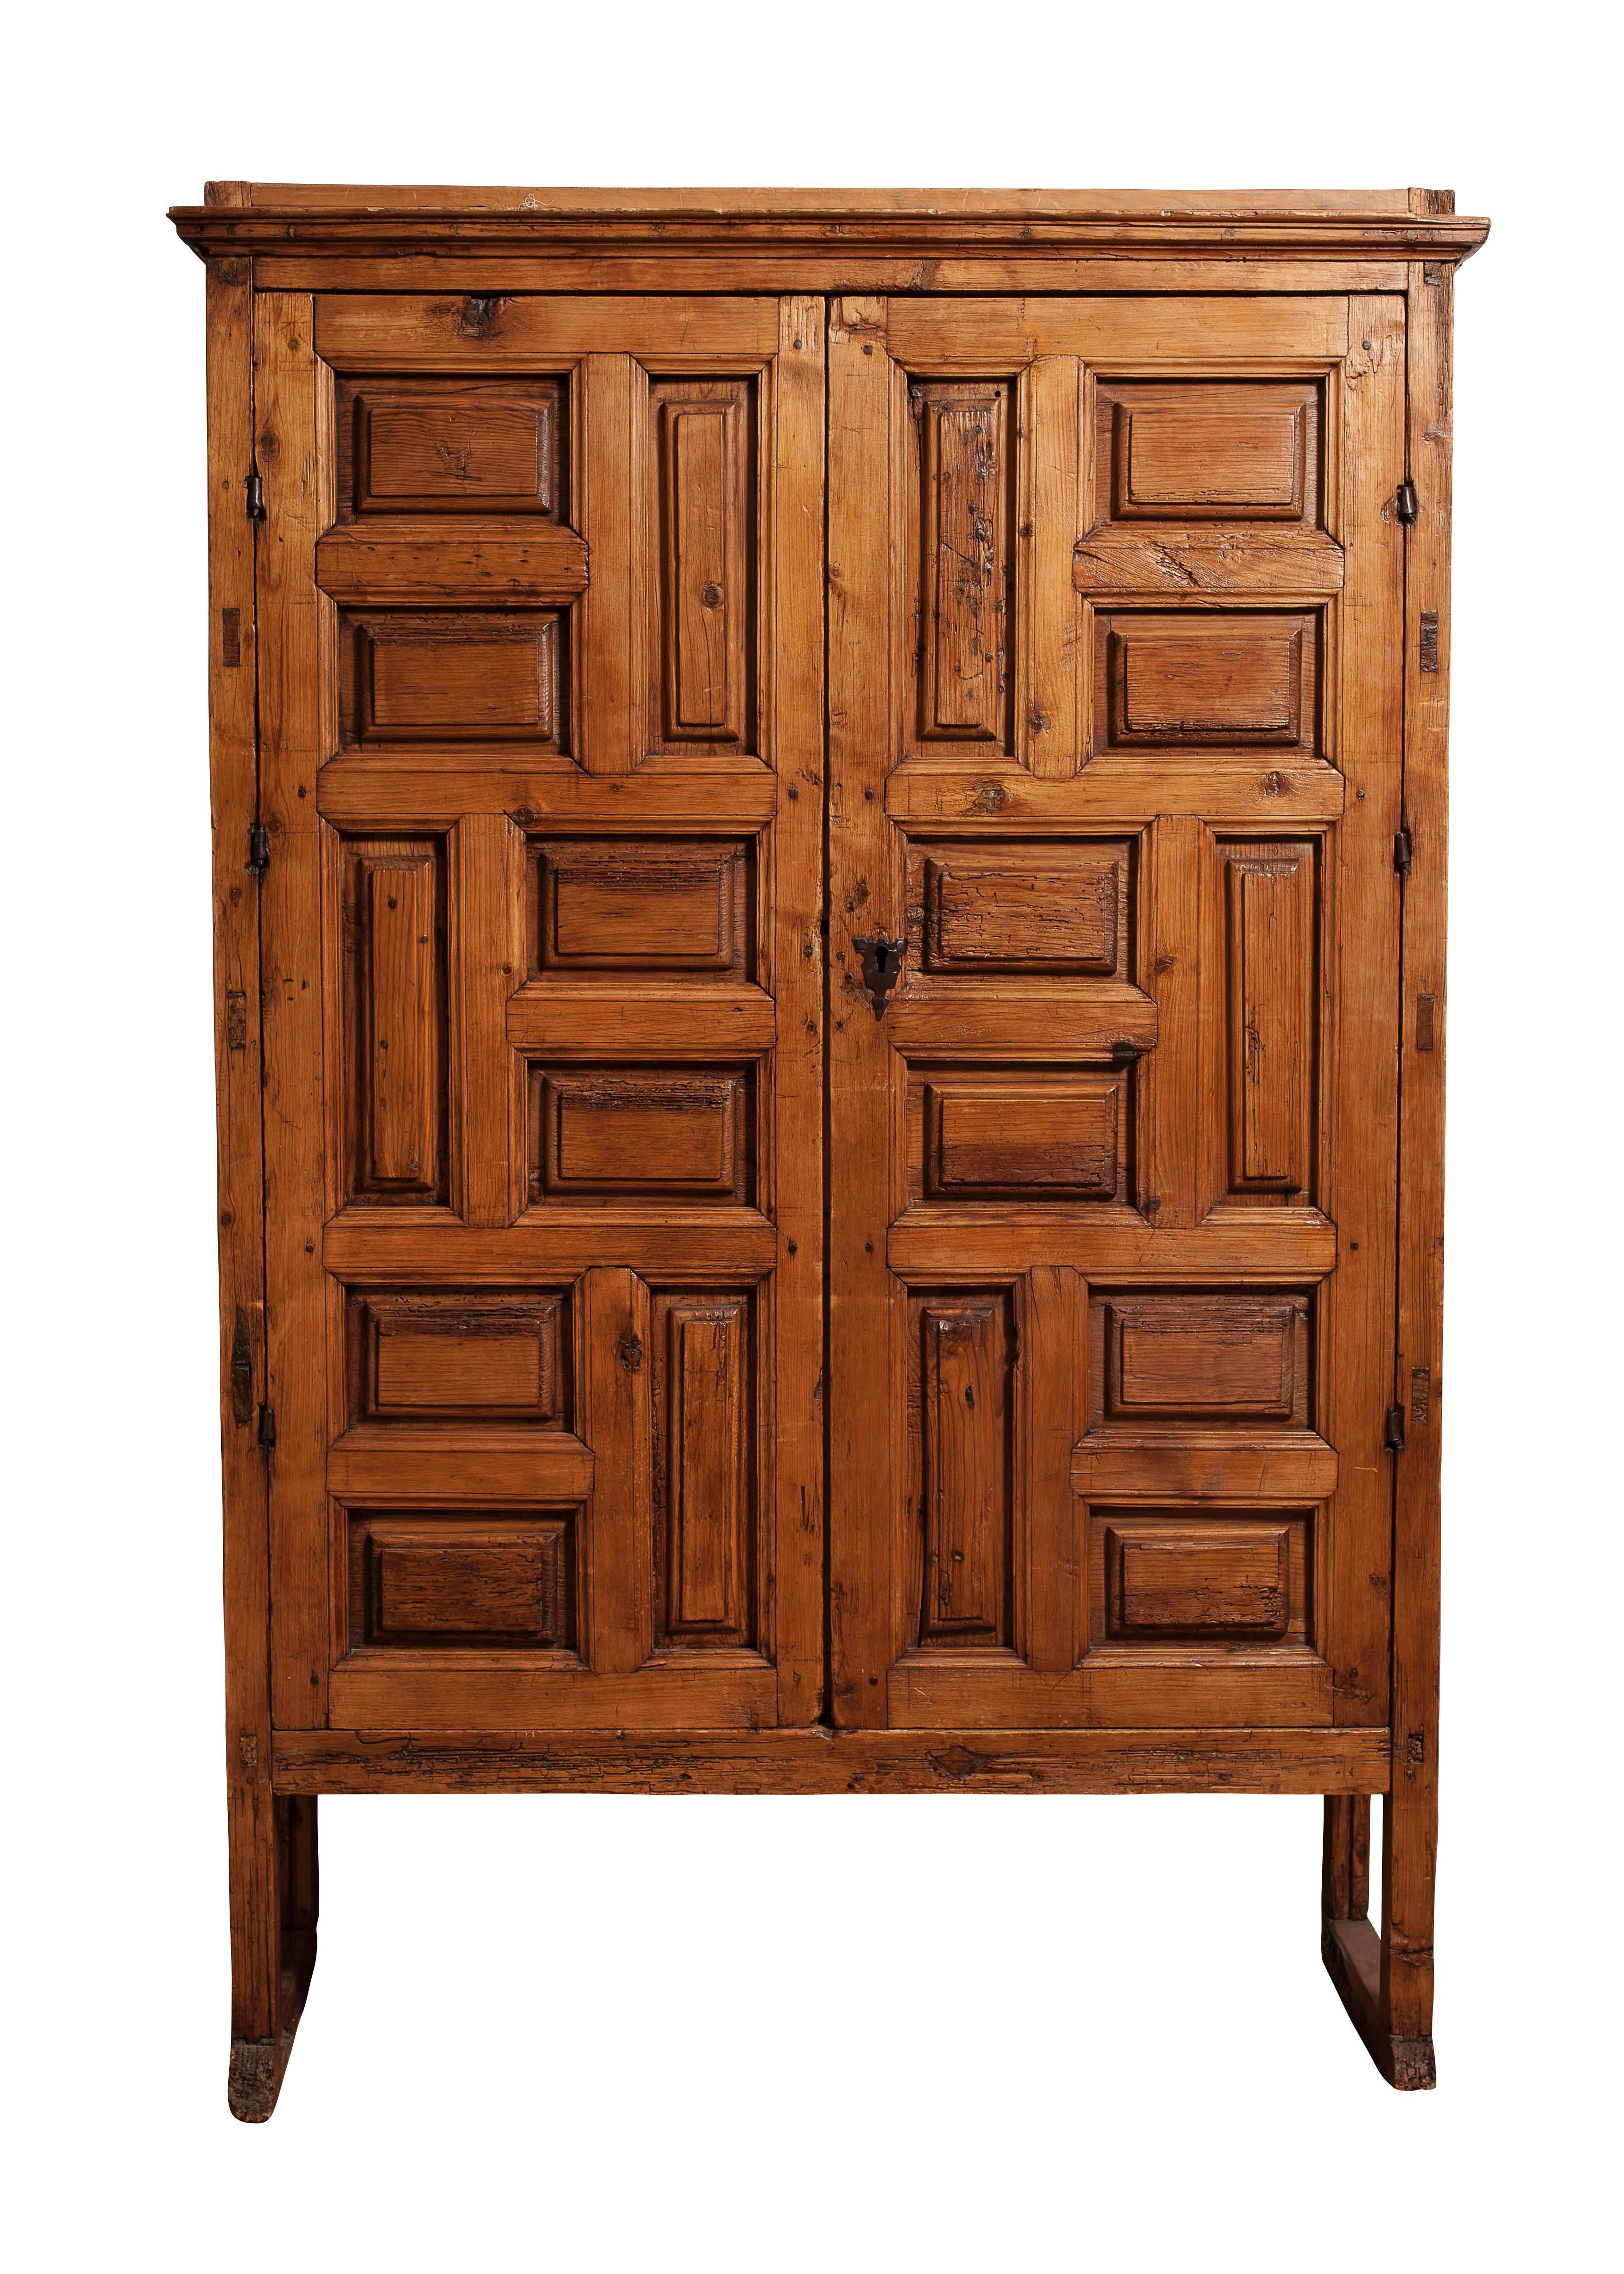 18th century Mexican carved pine armoire. Beautiful, masculine character and aged to perfection.